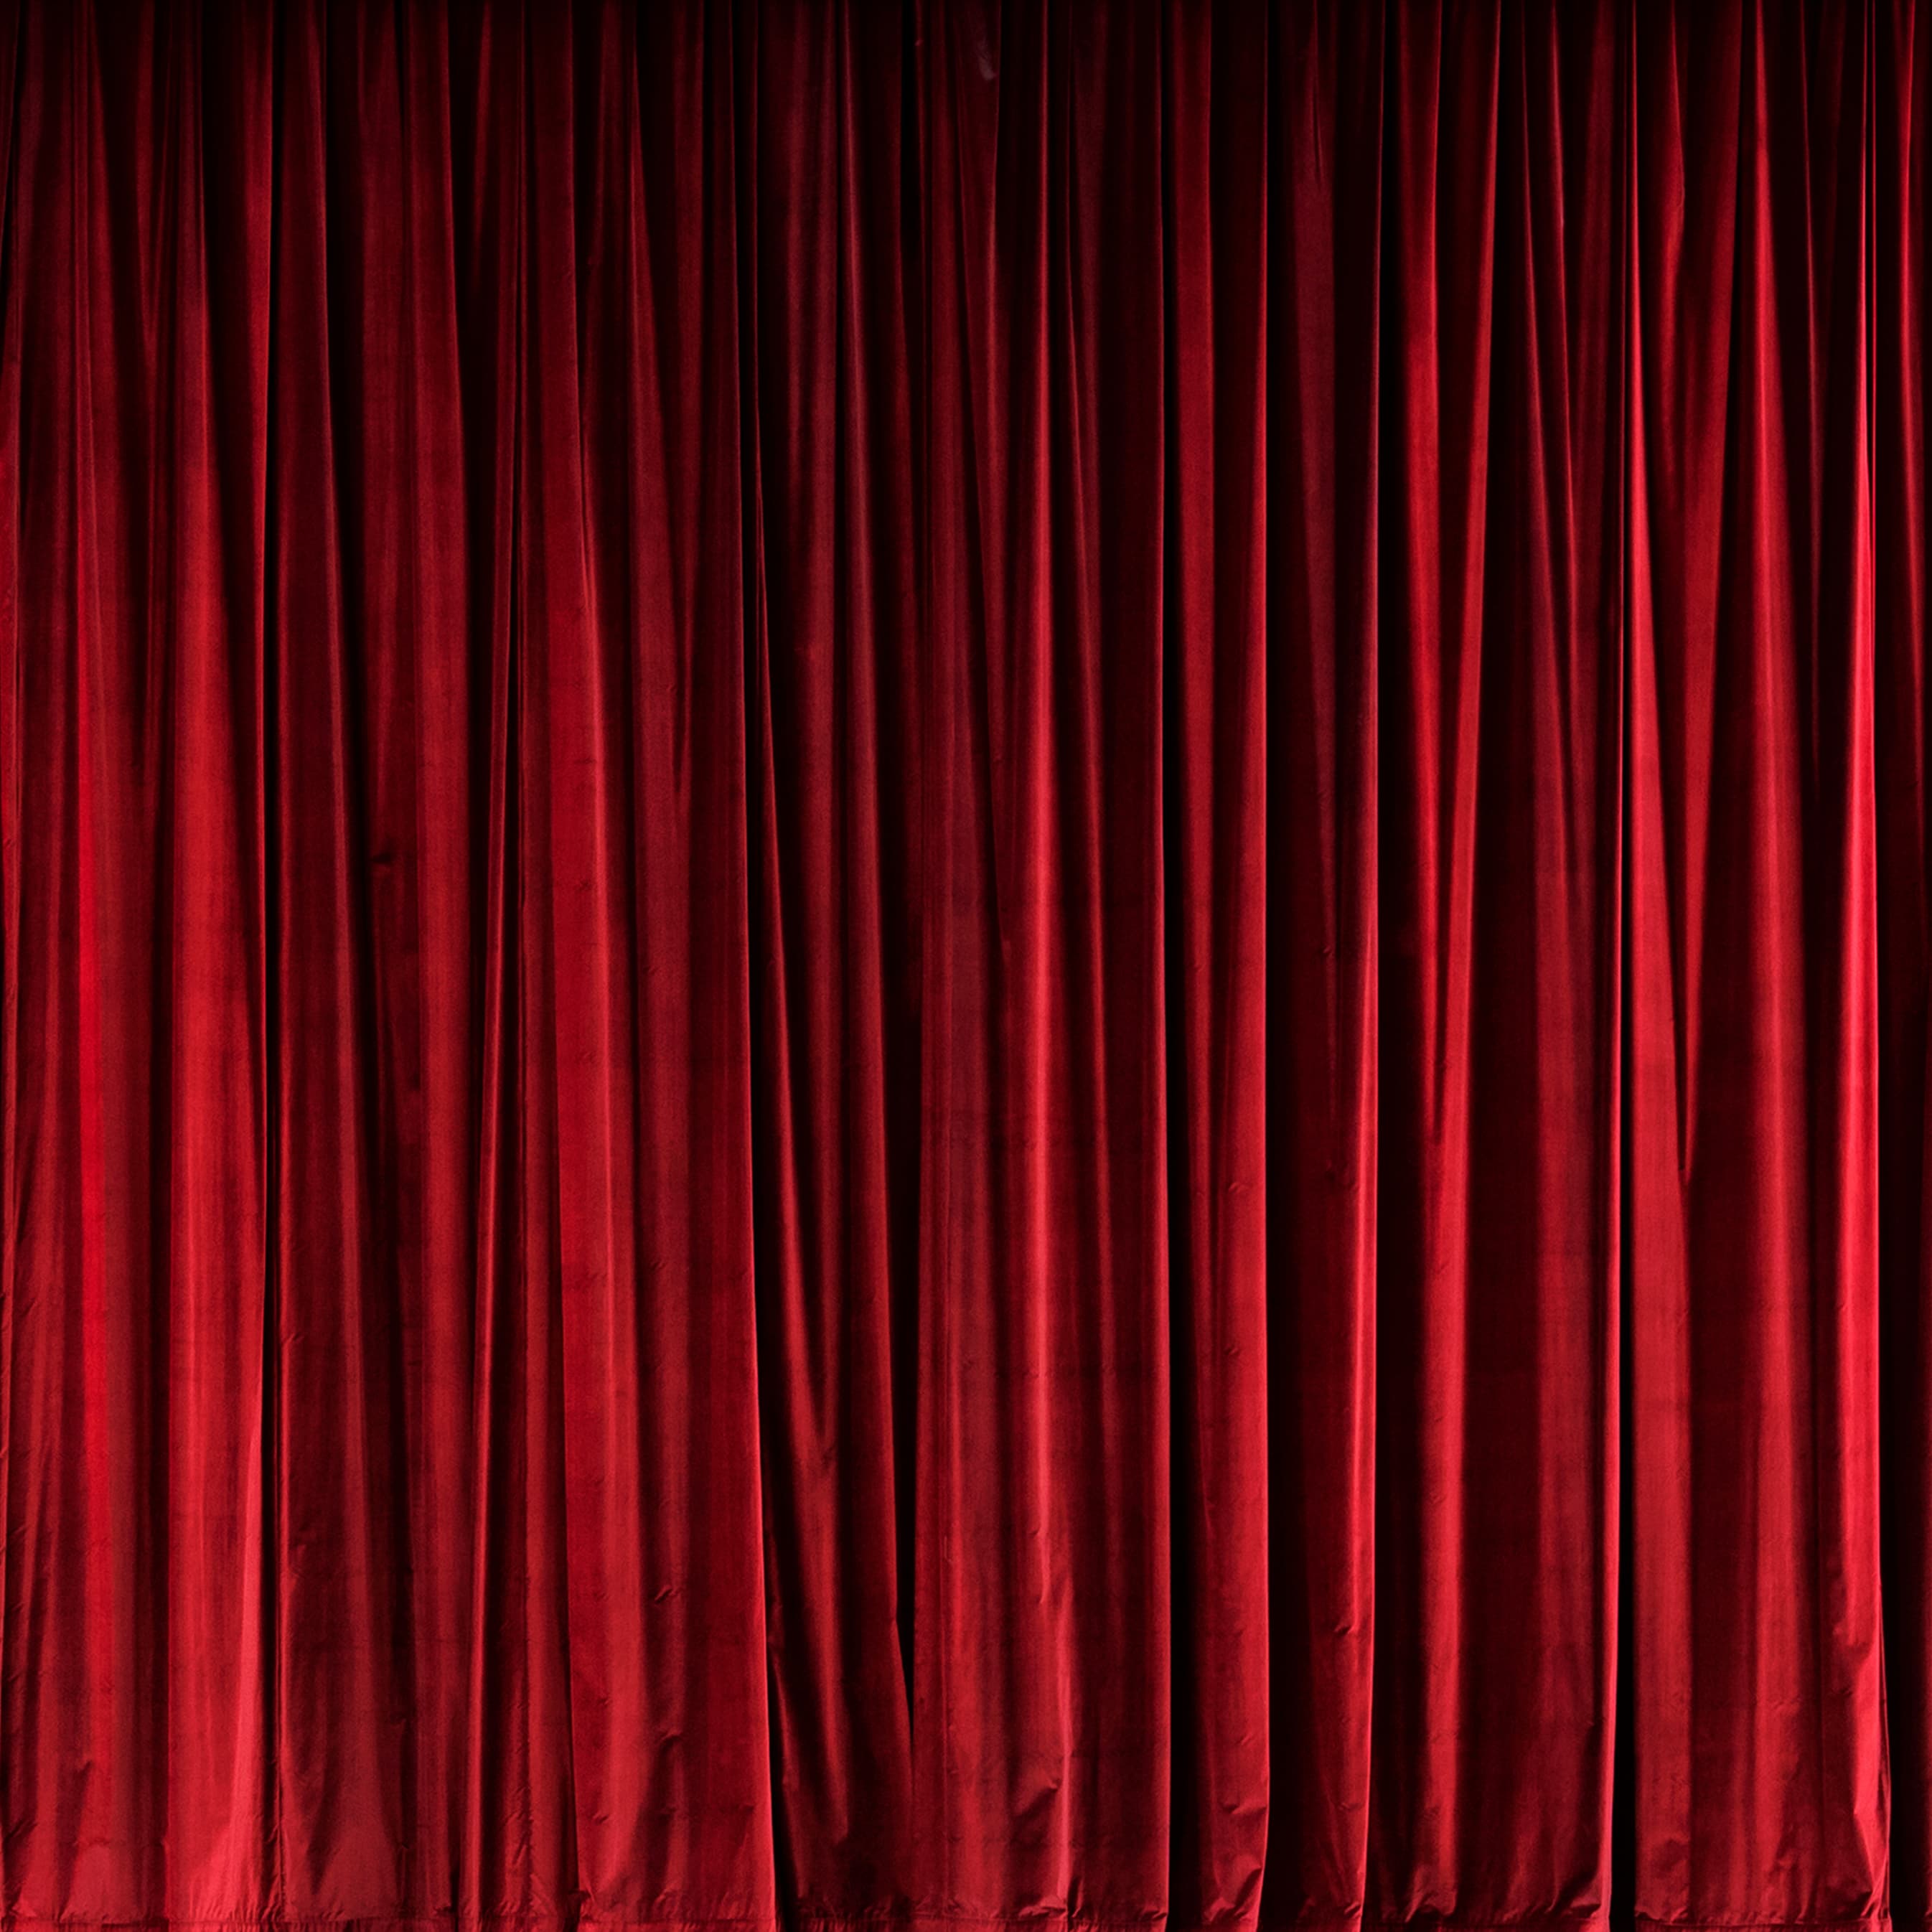 Looking for something fun to do tonight? Get your tickets for the best live shows in Madrid: theater, stand-up comedy, musicals, magic, and much more.